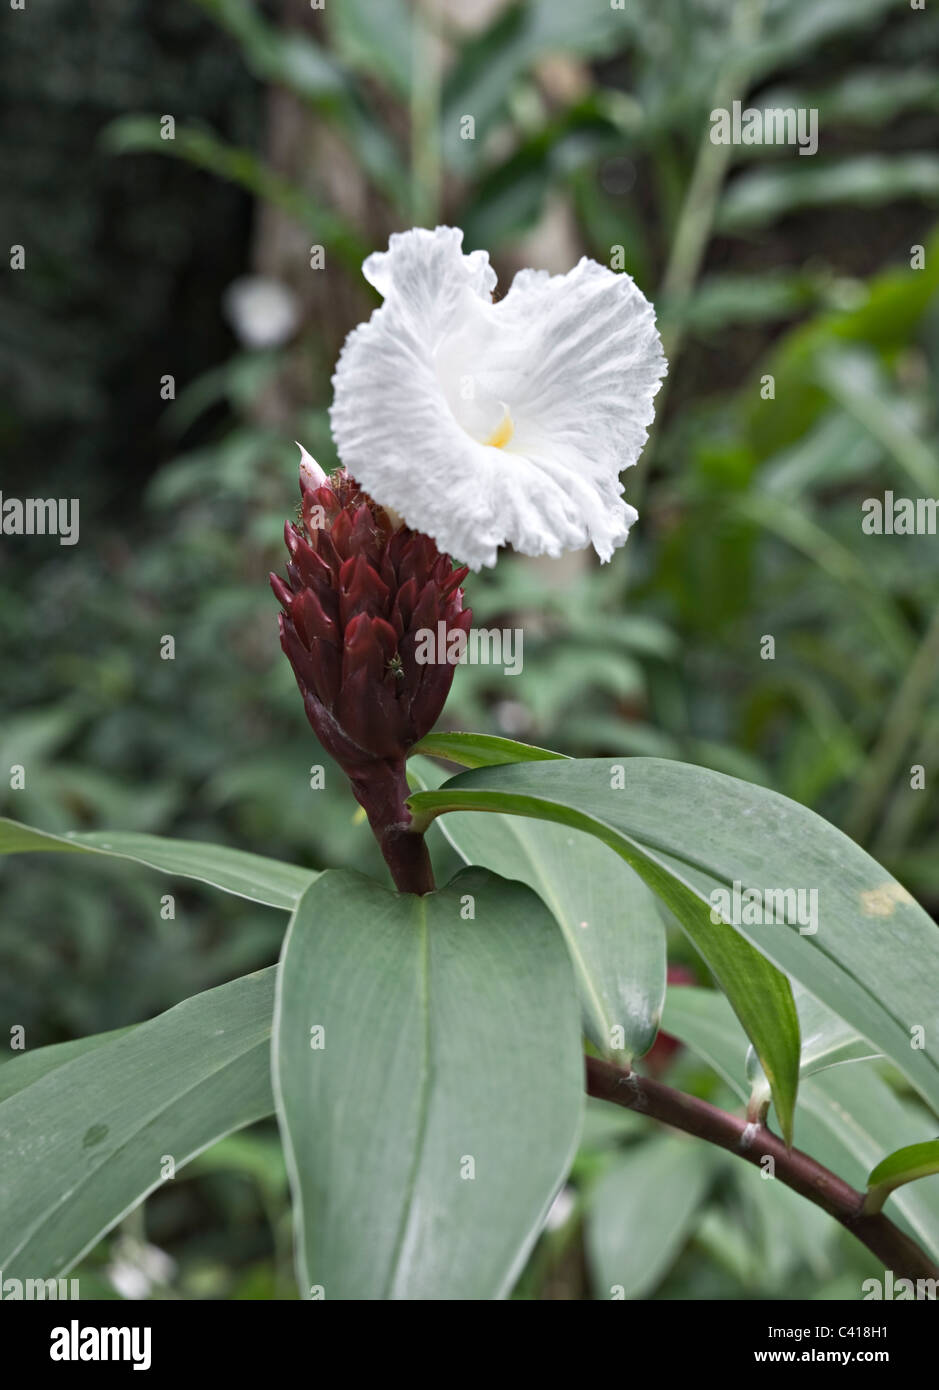 A Dark Red and White Flowering Ginger Plant in Bloom in Singapore Botanic Gardens Republic of Singapore Asia Stock Photo